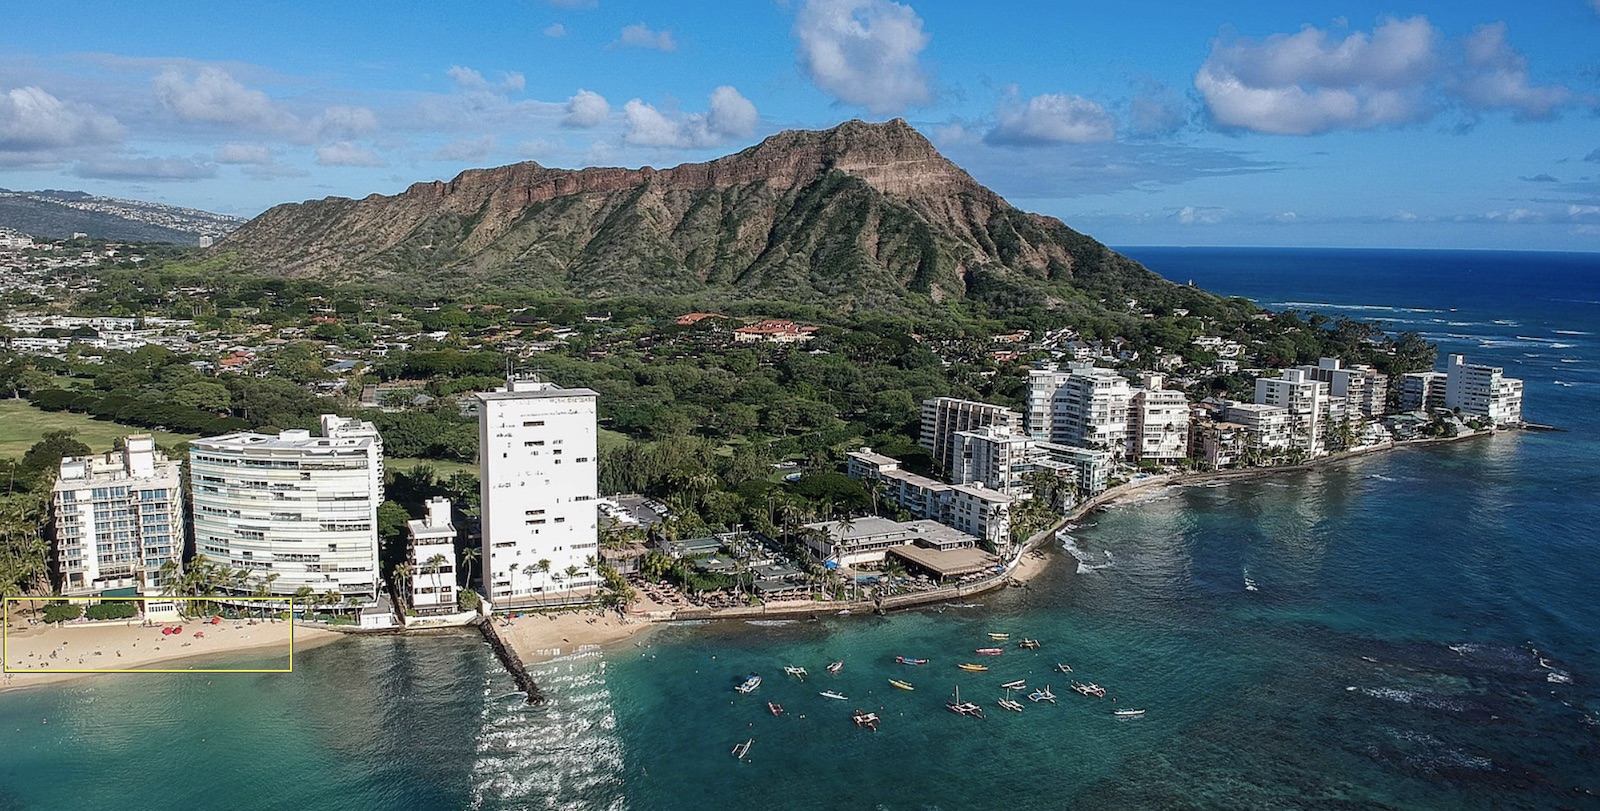 Hawaii is not one of the U.S. states with a low cost of living